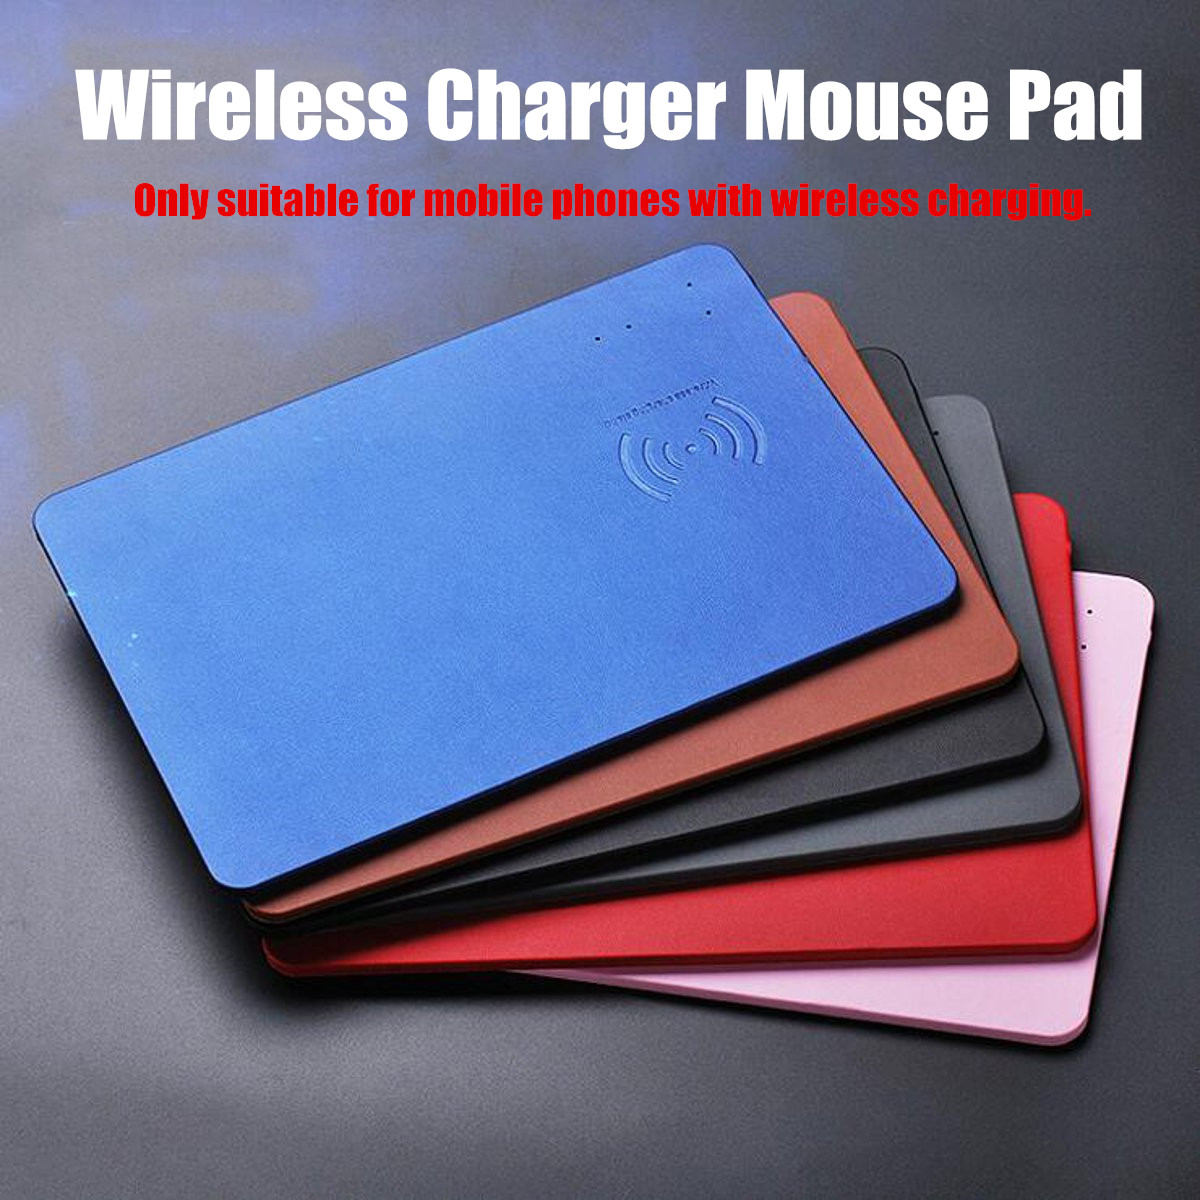 Imitation Leather Mobile Phones Wireless Fast Charger Mouse Pad Qi Wireless Charging 15